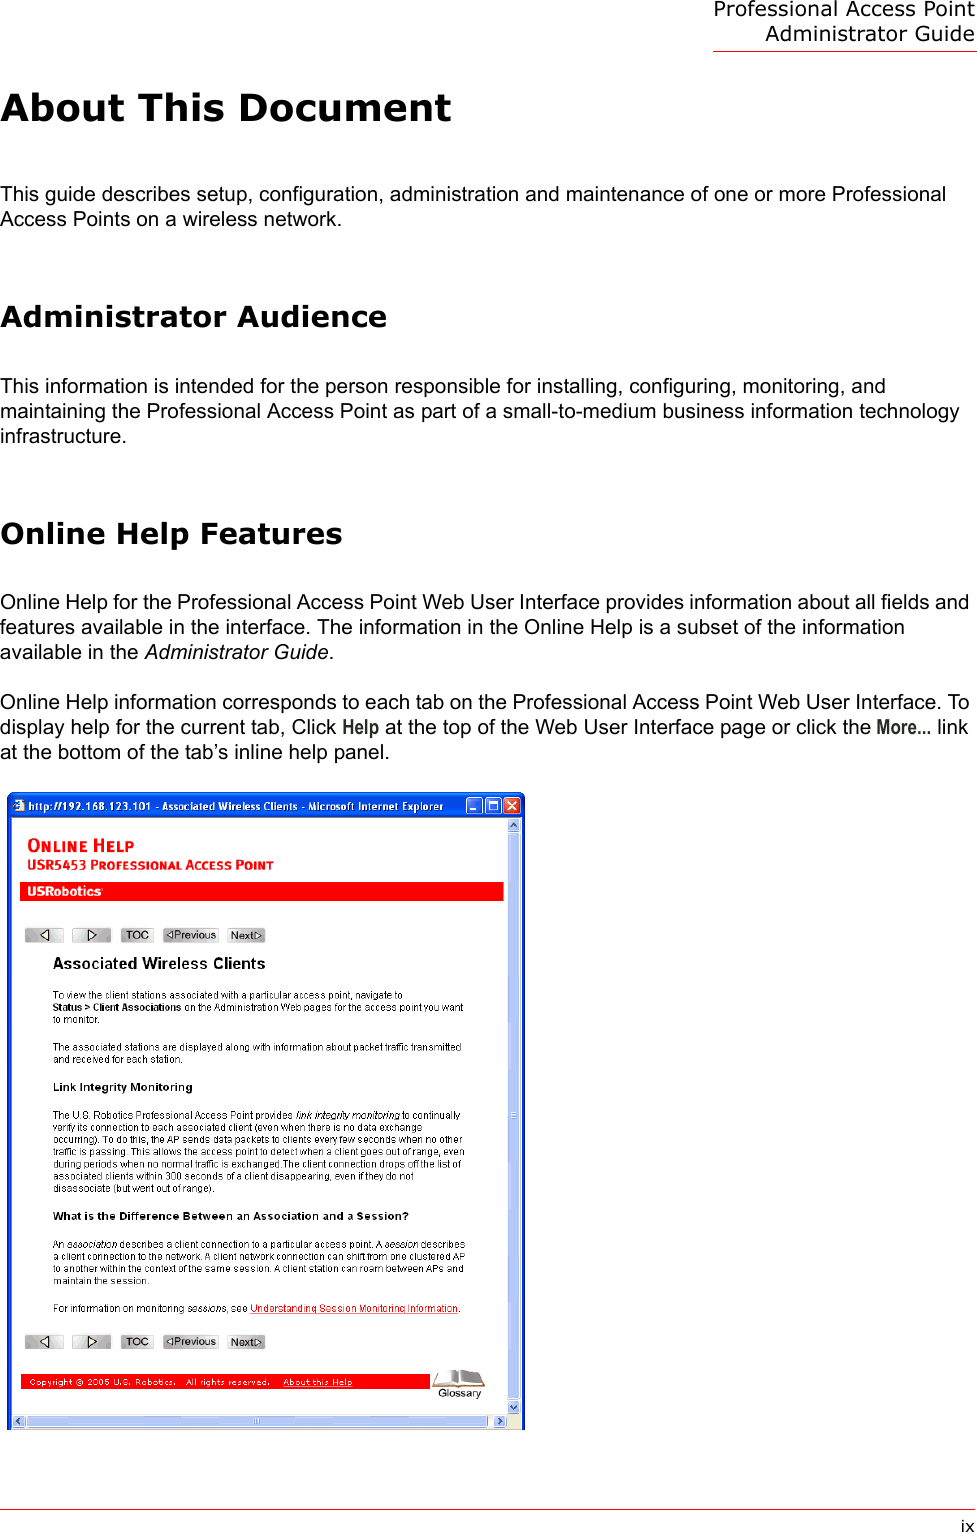 Professional Access Point Administrator GuideixAbout This DocumentThis guide describes setup, configuration, administration and maintenance of one or more Professional Access Points on a wireless network.Administrator AudienceThis information is intended for the person responsible for installing, configuring, monitoring, and maintaining the Professional Access Point as part of a small-to-medium business information technology infrastructure.Online Help FeaturesOnline Help for the Professional Access Point Web User Interface provides information about all fields and features available in the interface. The information in the Online Help is a subset of the information available in the Administrator Guide.Online Help information corresponds to each tab on the Professional Access Point Web User Interface. To display help for the current tab, Click Help at the top of the Web User Interface page or click the More... link at the bottom of the tab’s inline help panel.